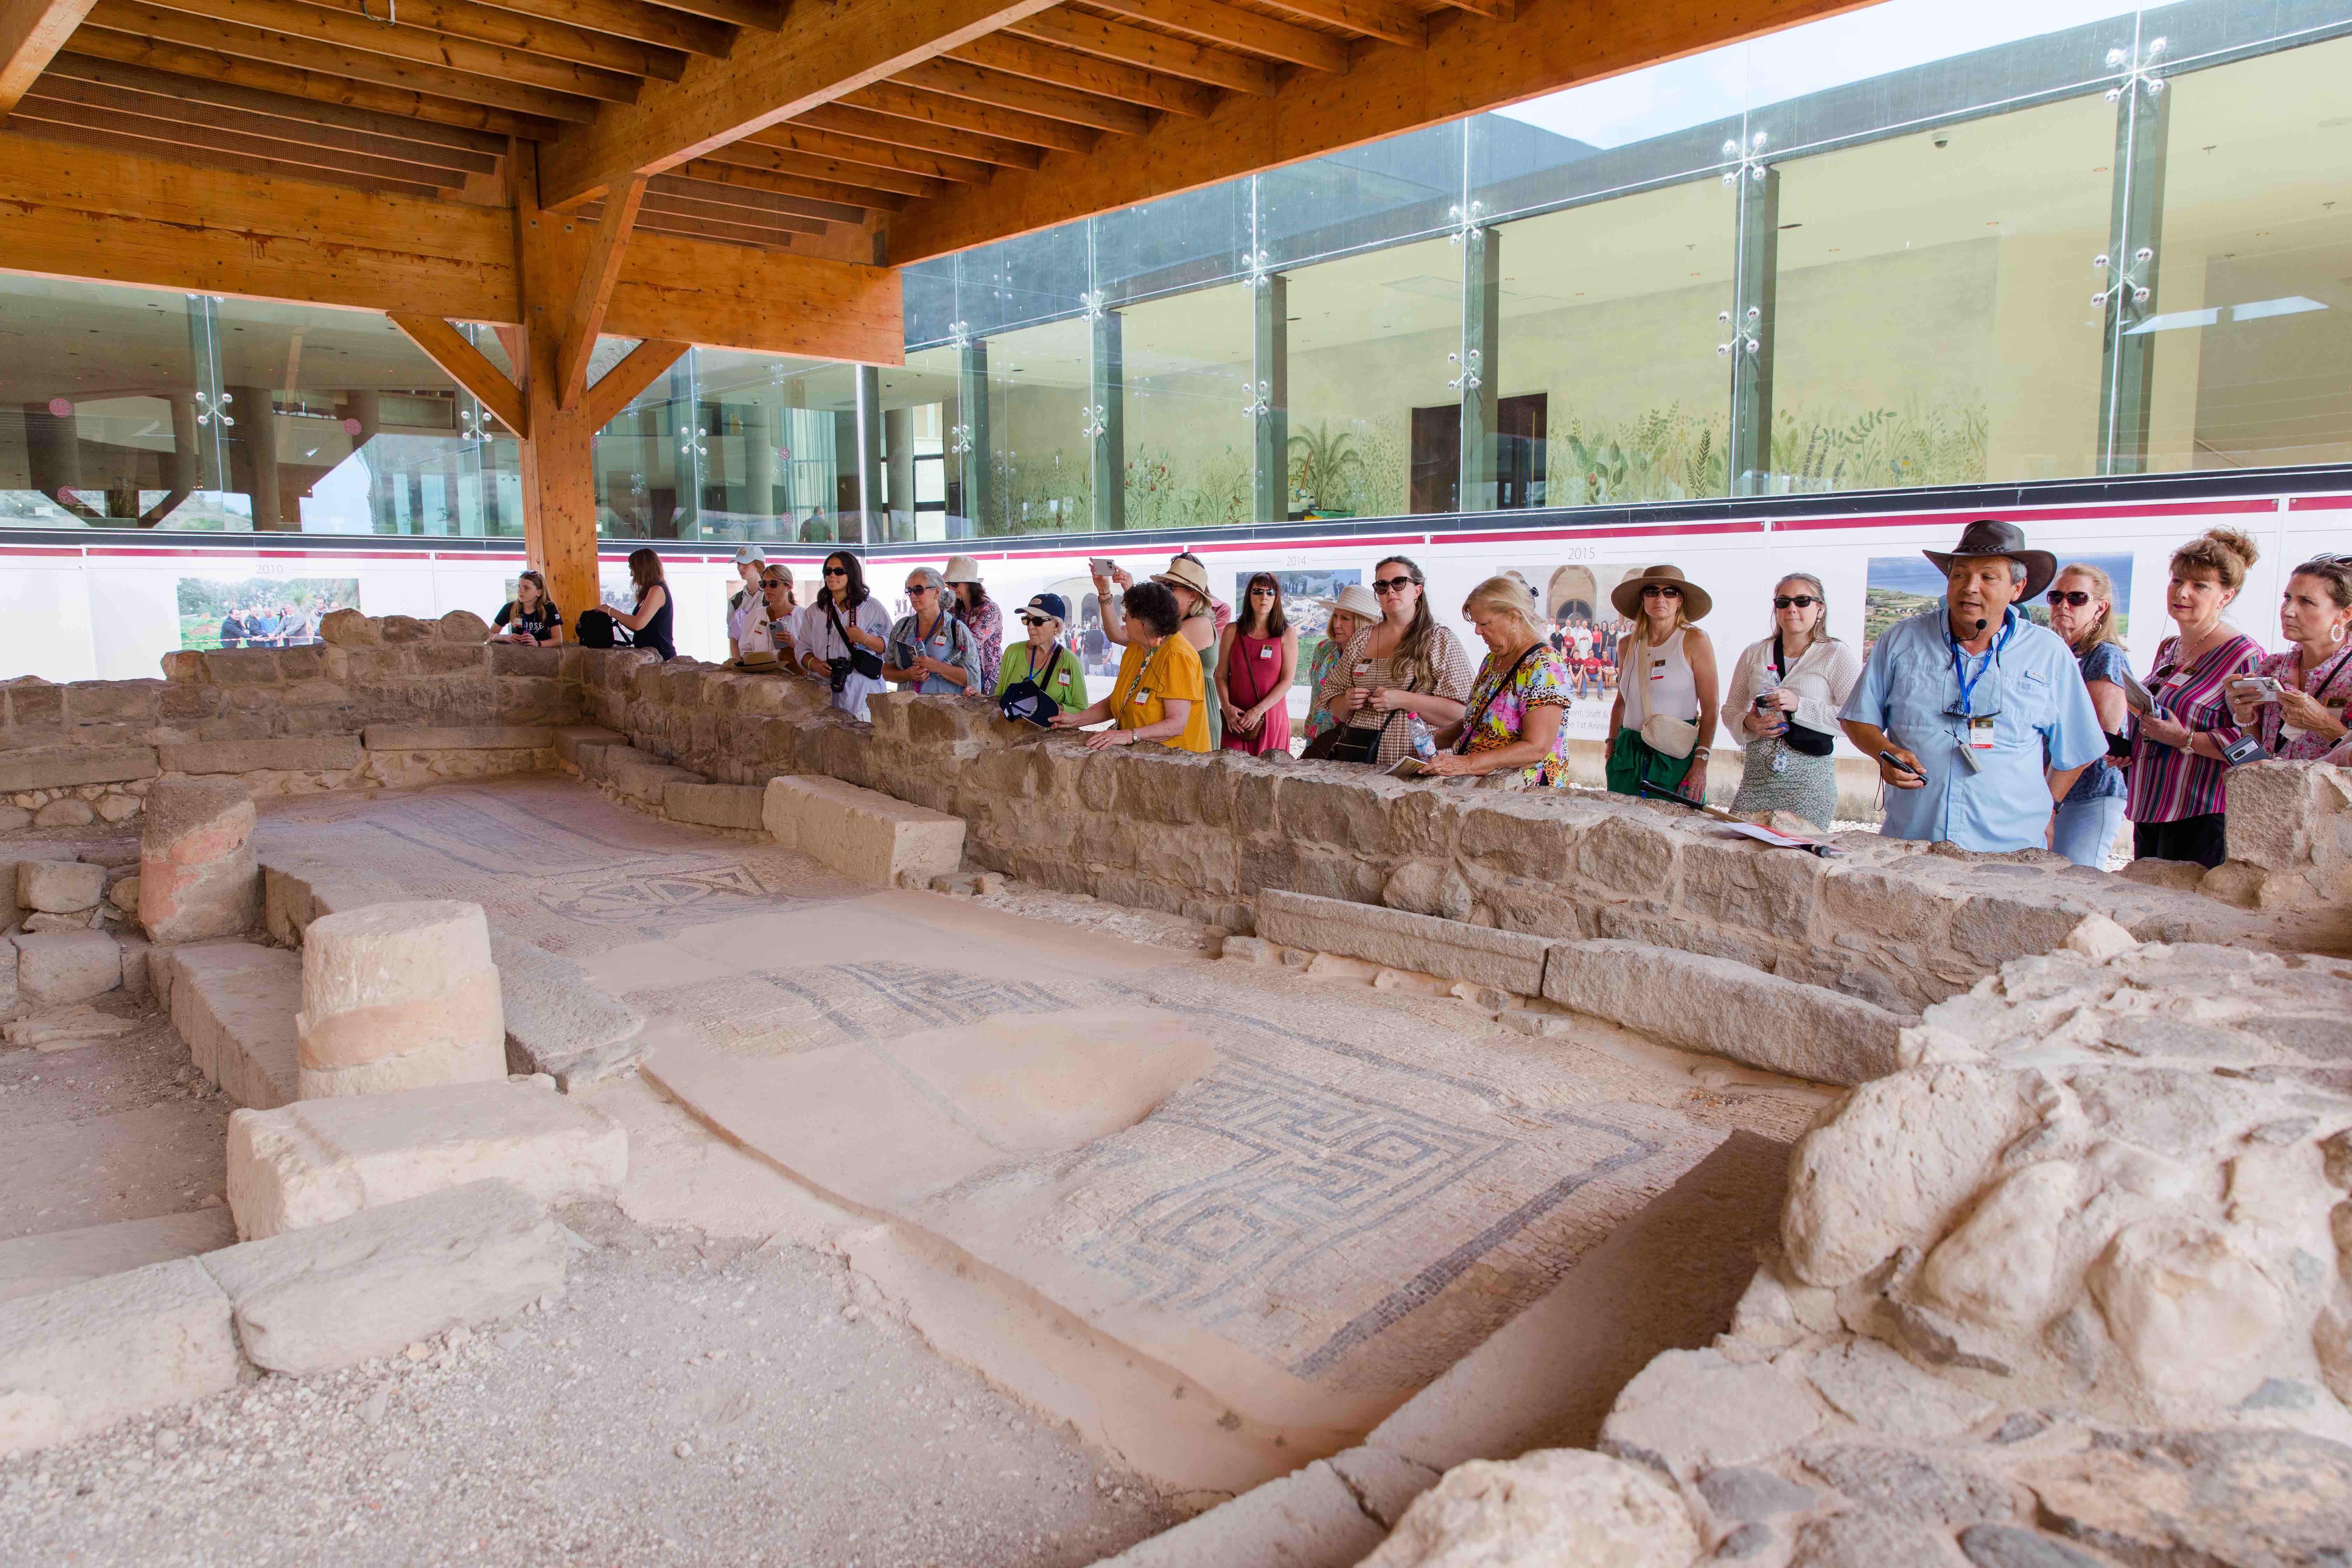 A group of tourists learn about Magdala from a tour guide at the archaeological site